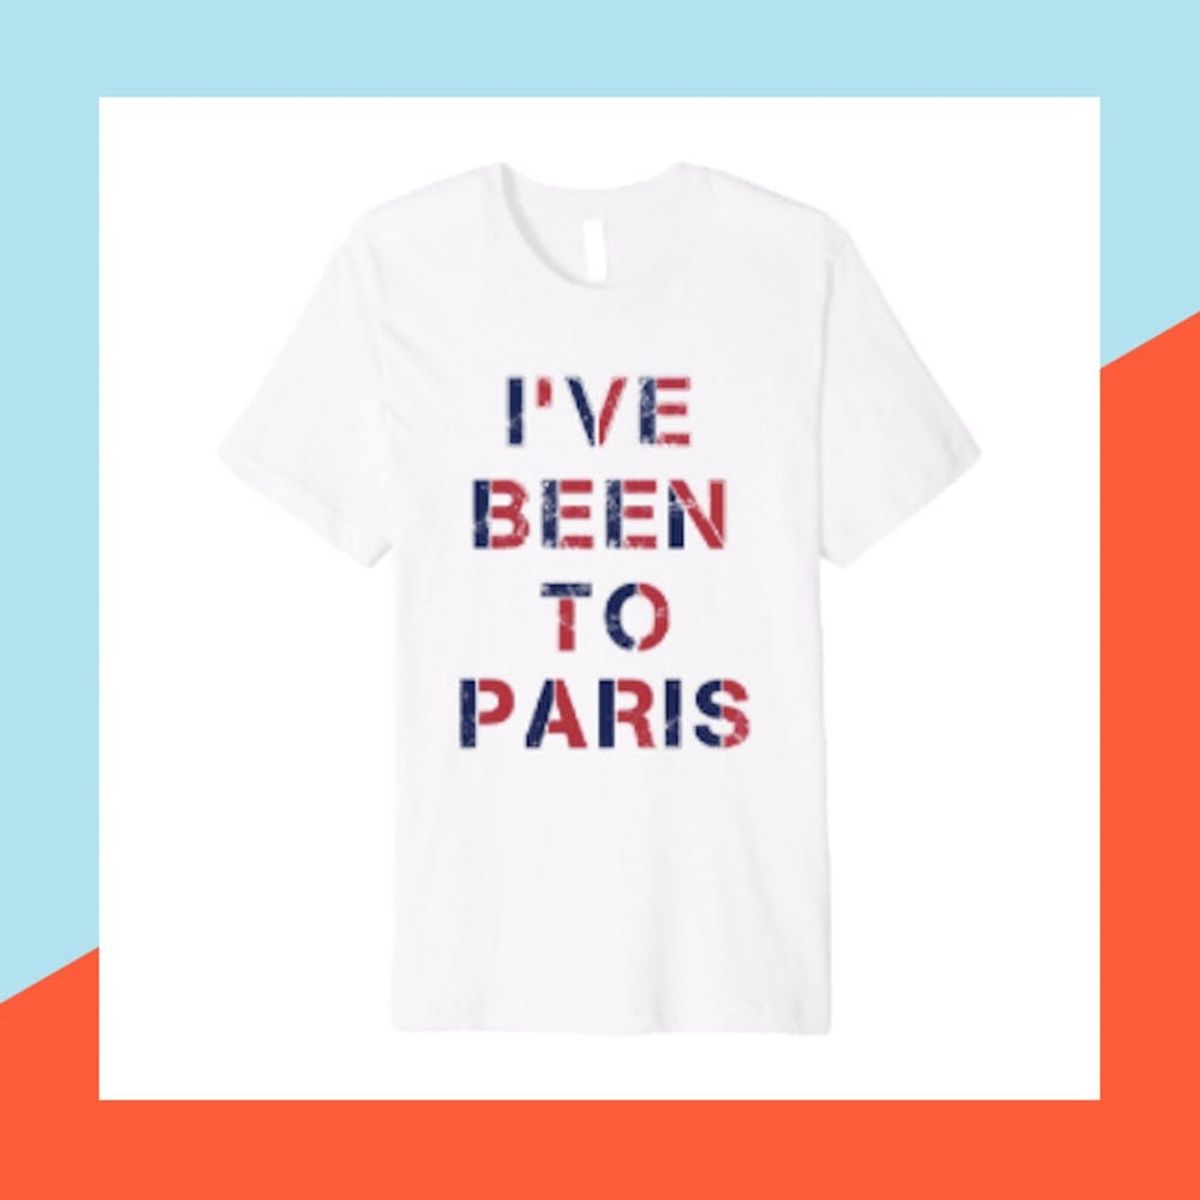 Here’s How You Can Snag Lauren Conrad’s Paris Tee for $19